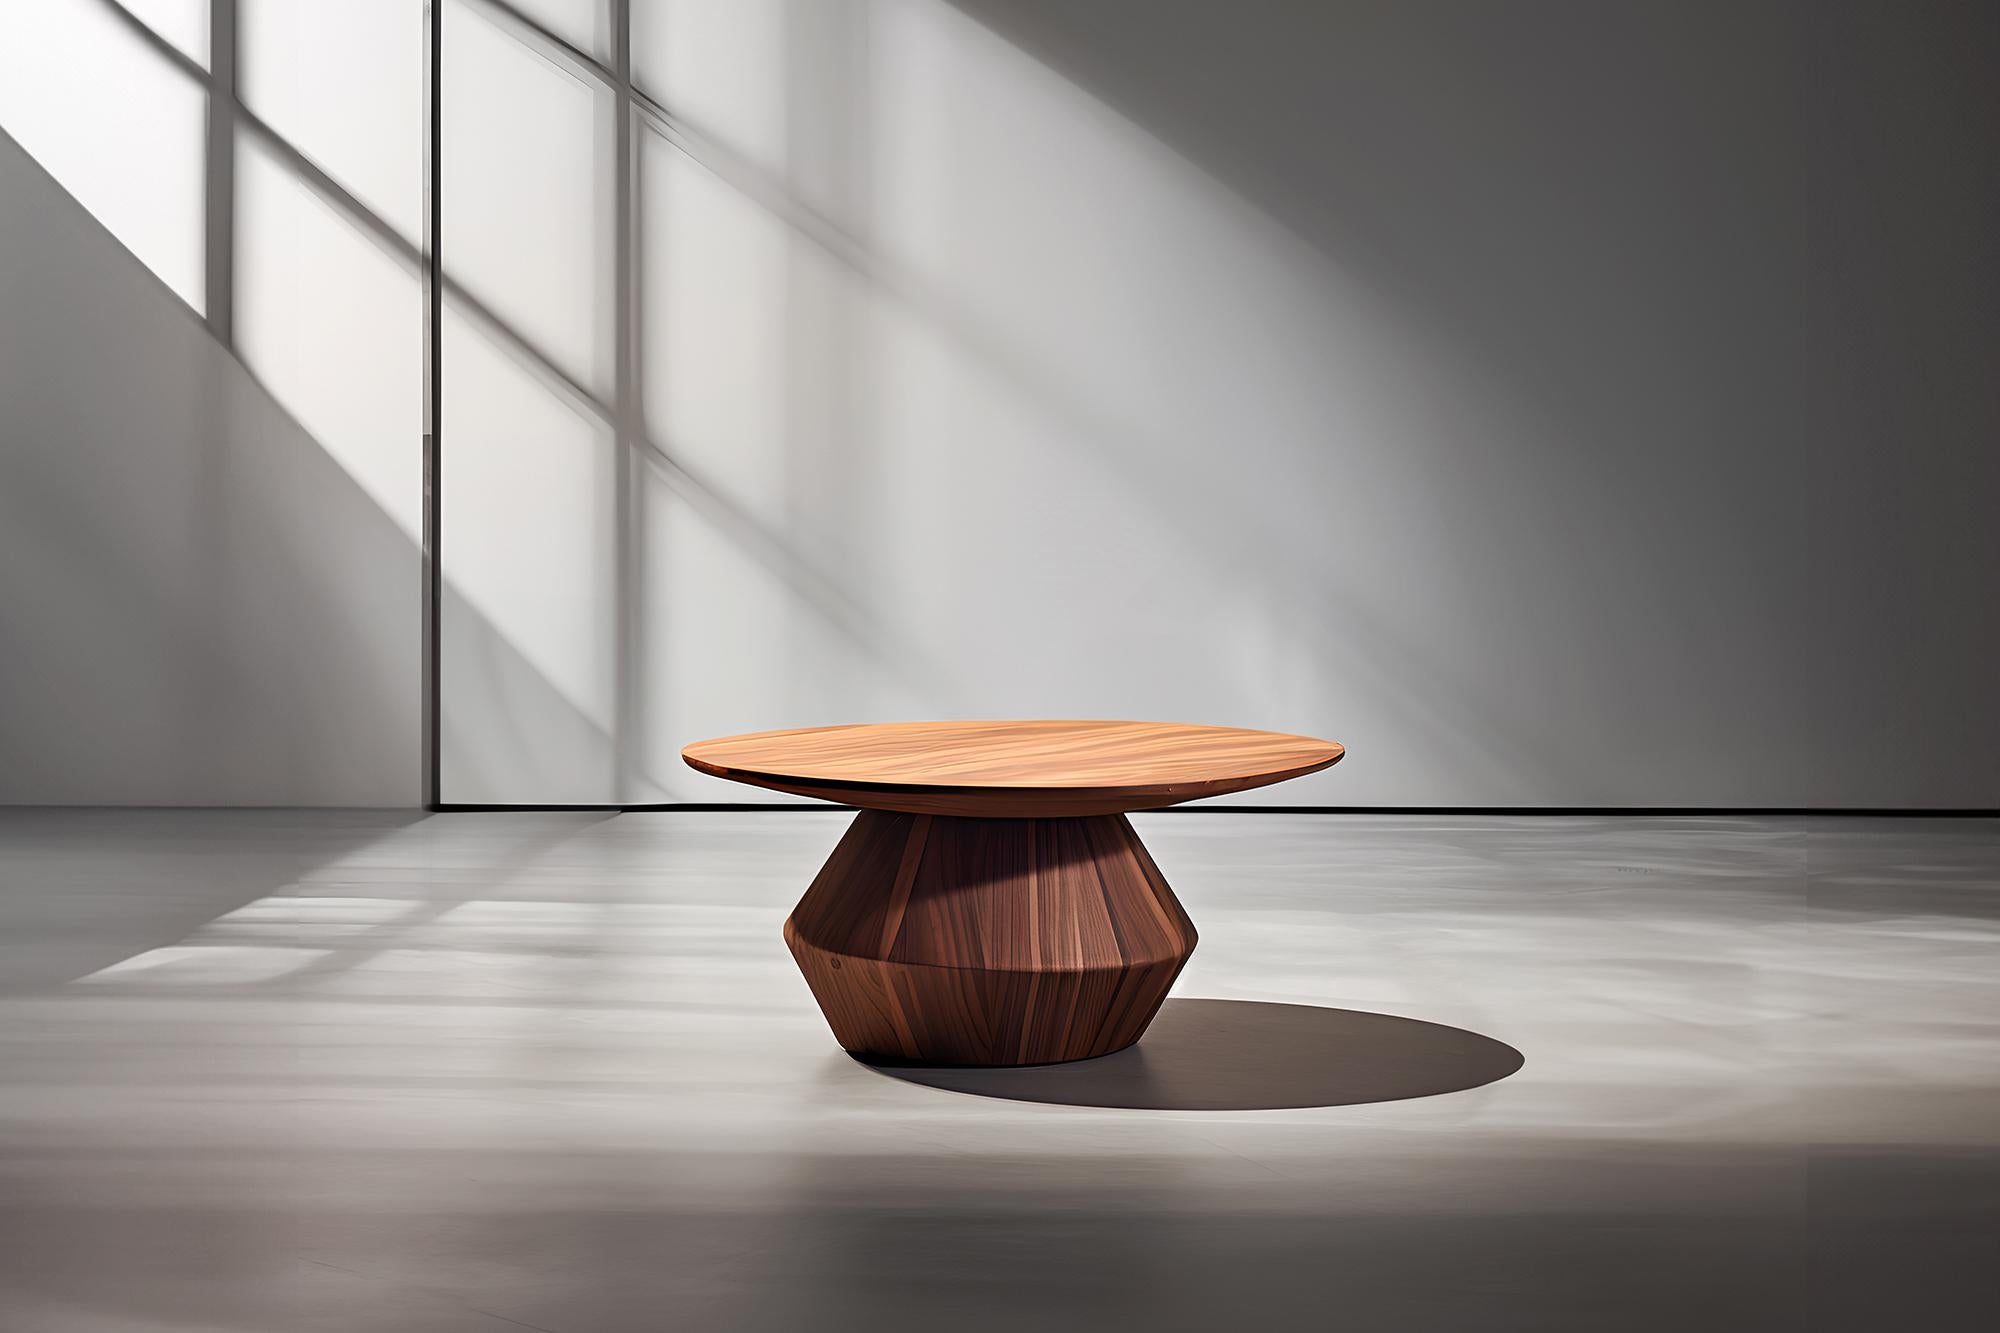 Sculptural Coffee Table Made of Solid Wood, Center Table Solace S41 by Joel Escalona


The Solace table series, designed by Joel Escalona, is a furniture collection that exudes balance and presence, thanks to its sensuous, dense, and irregular